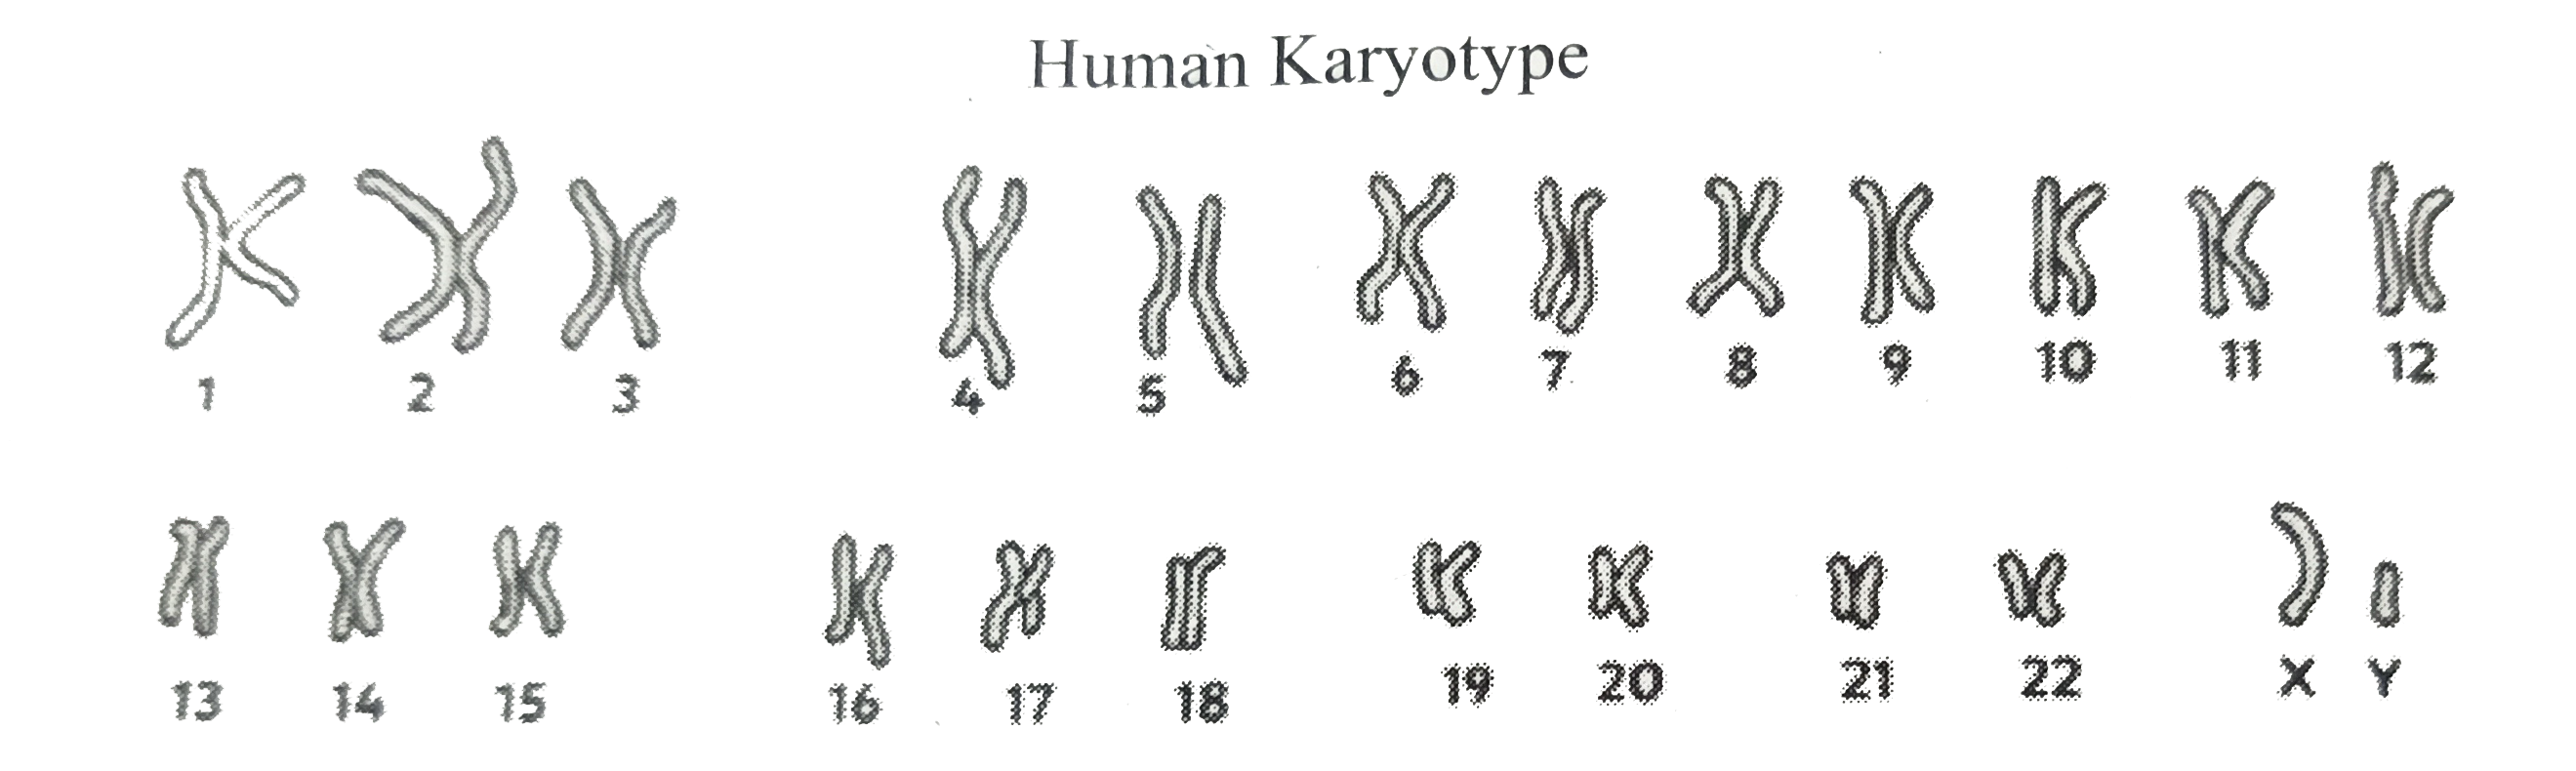 Given below represents the human karyotype of male. Notify the abnormality and mention any two symptoms of the respective abnormality.